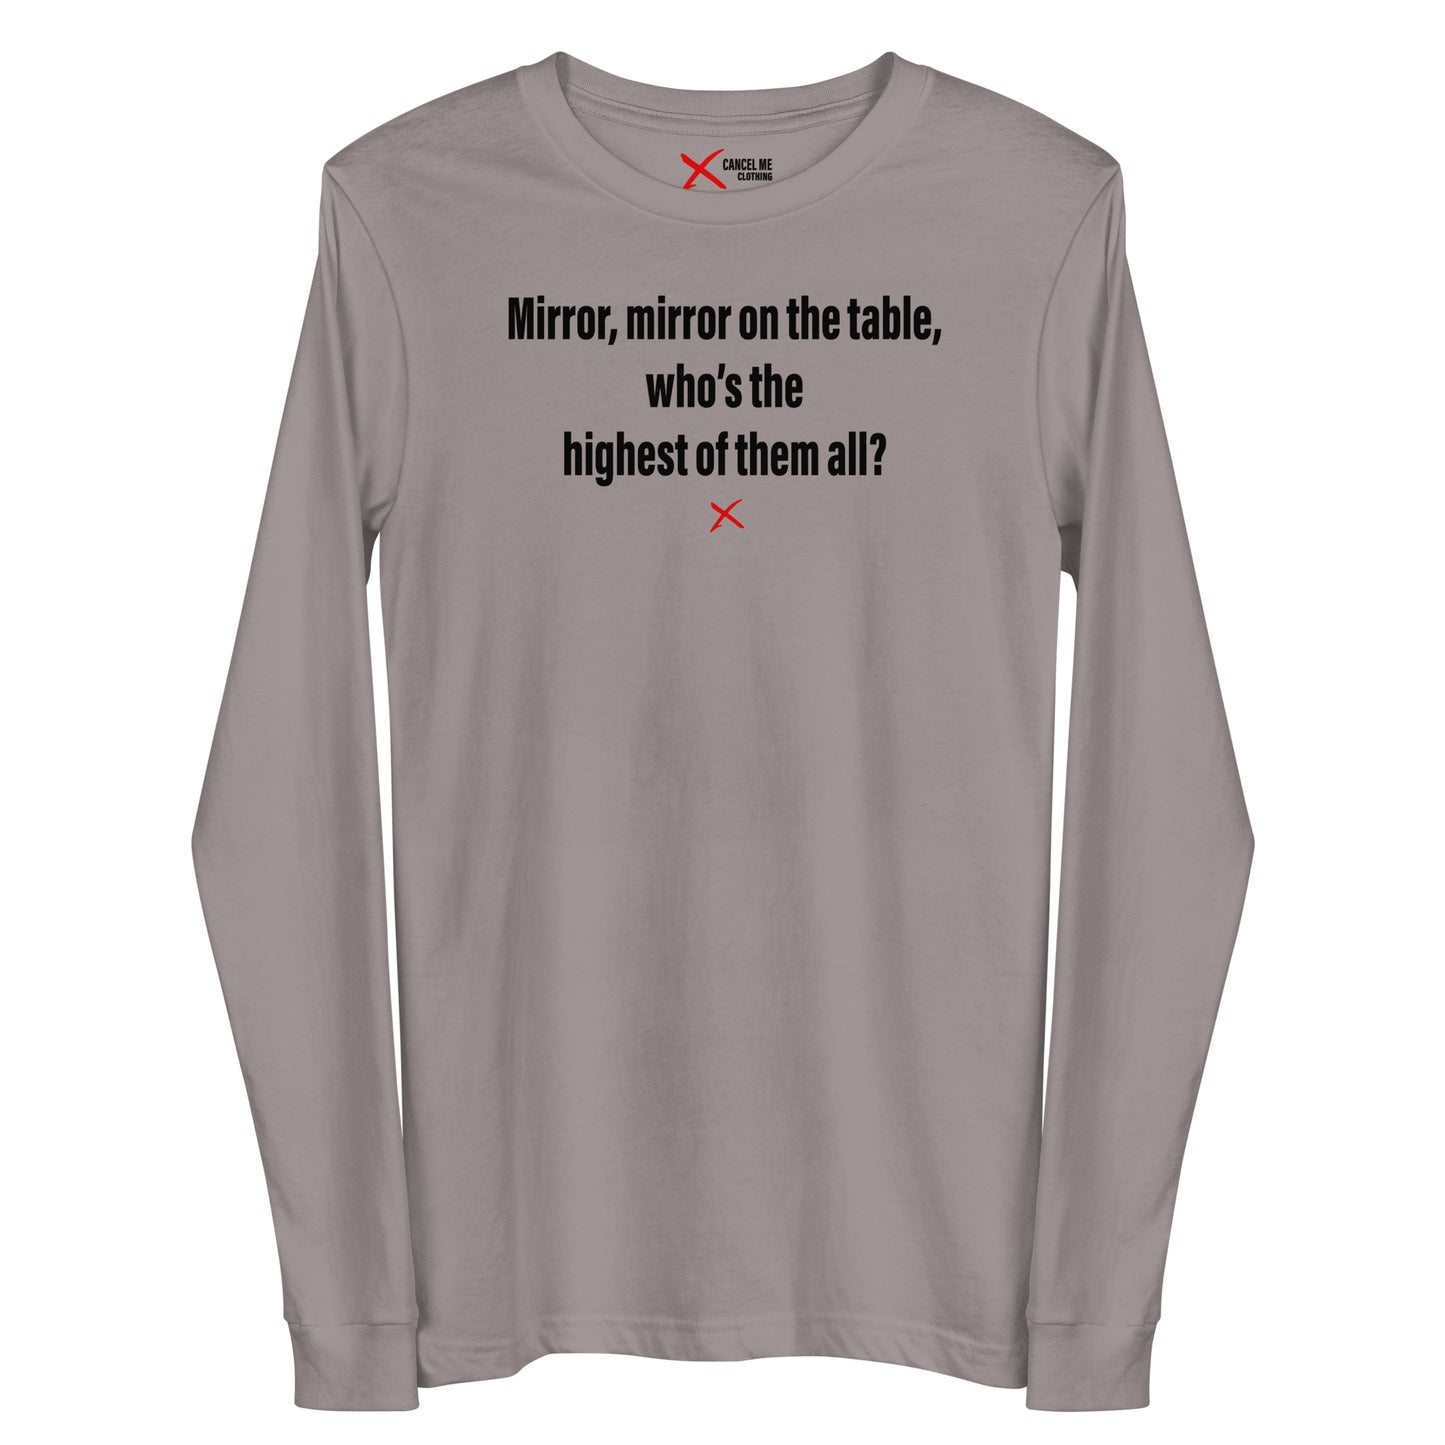 Mirror, mirror on the table, who's the highest of them all? - Longsleeve